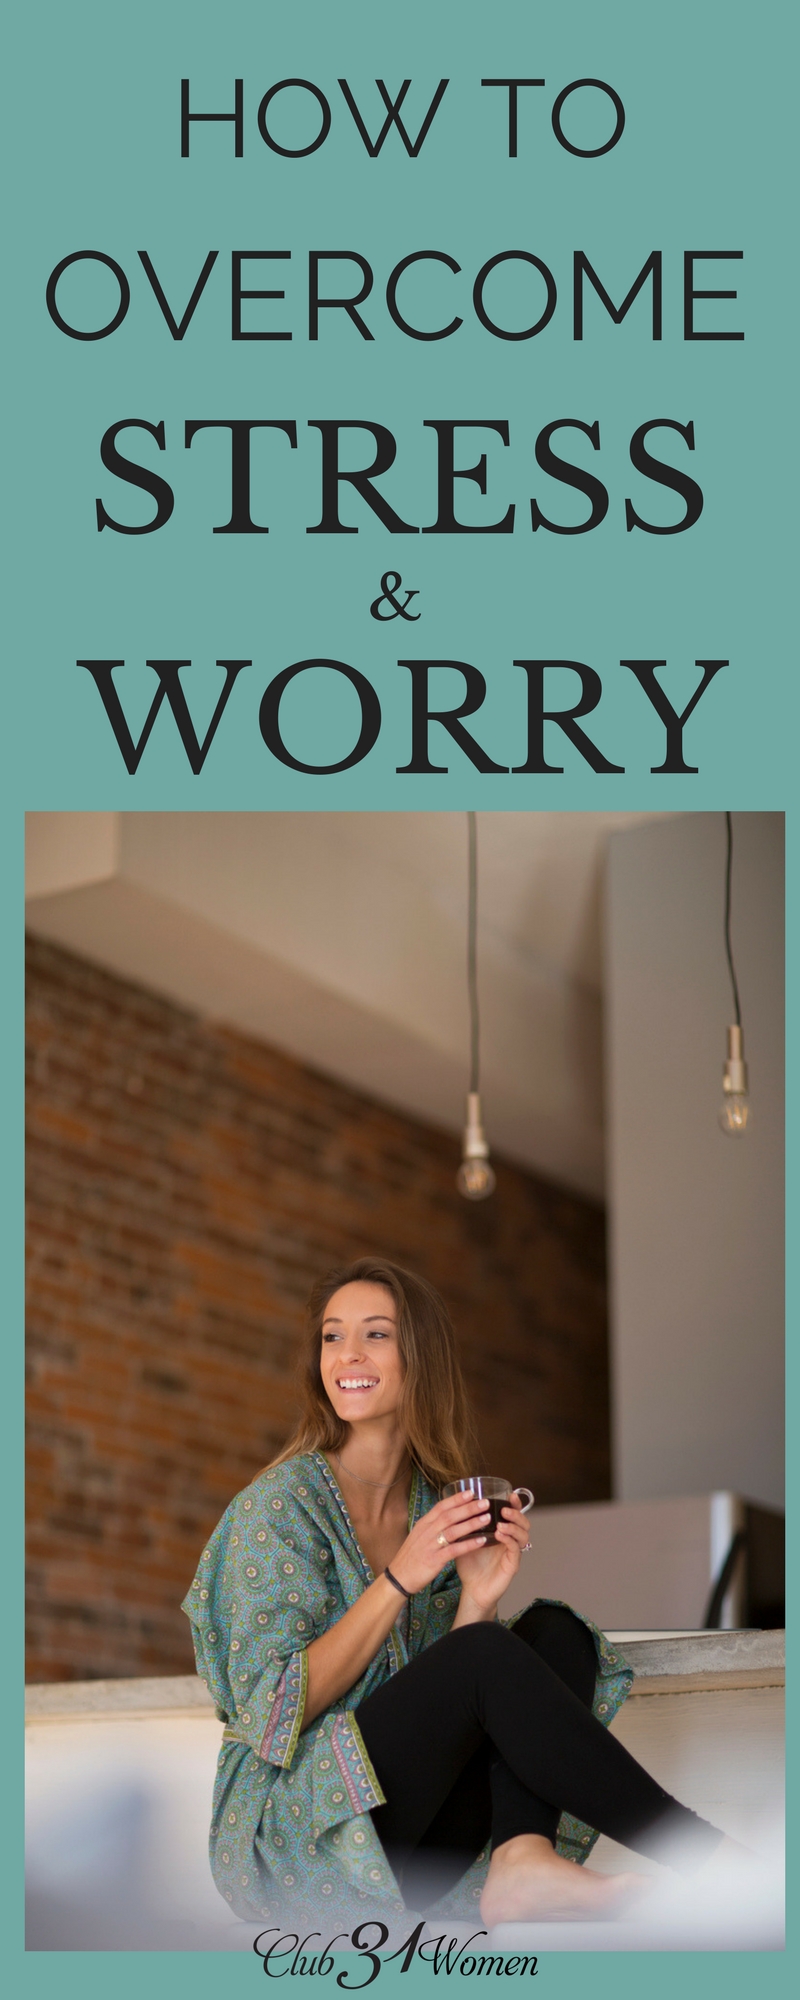 Do you struggle with stress and worry? Here are two reasons why that might be, as well as some practical ways to find more peace in each day!  via @Club31Women